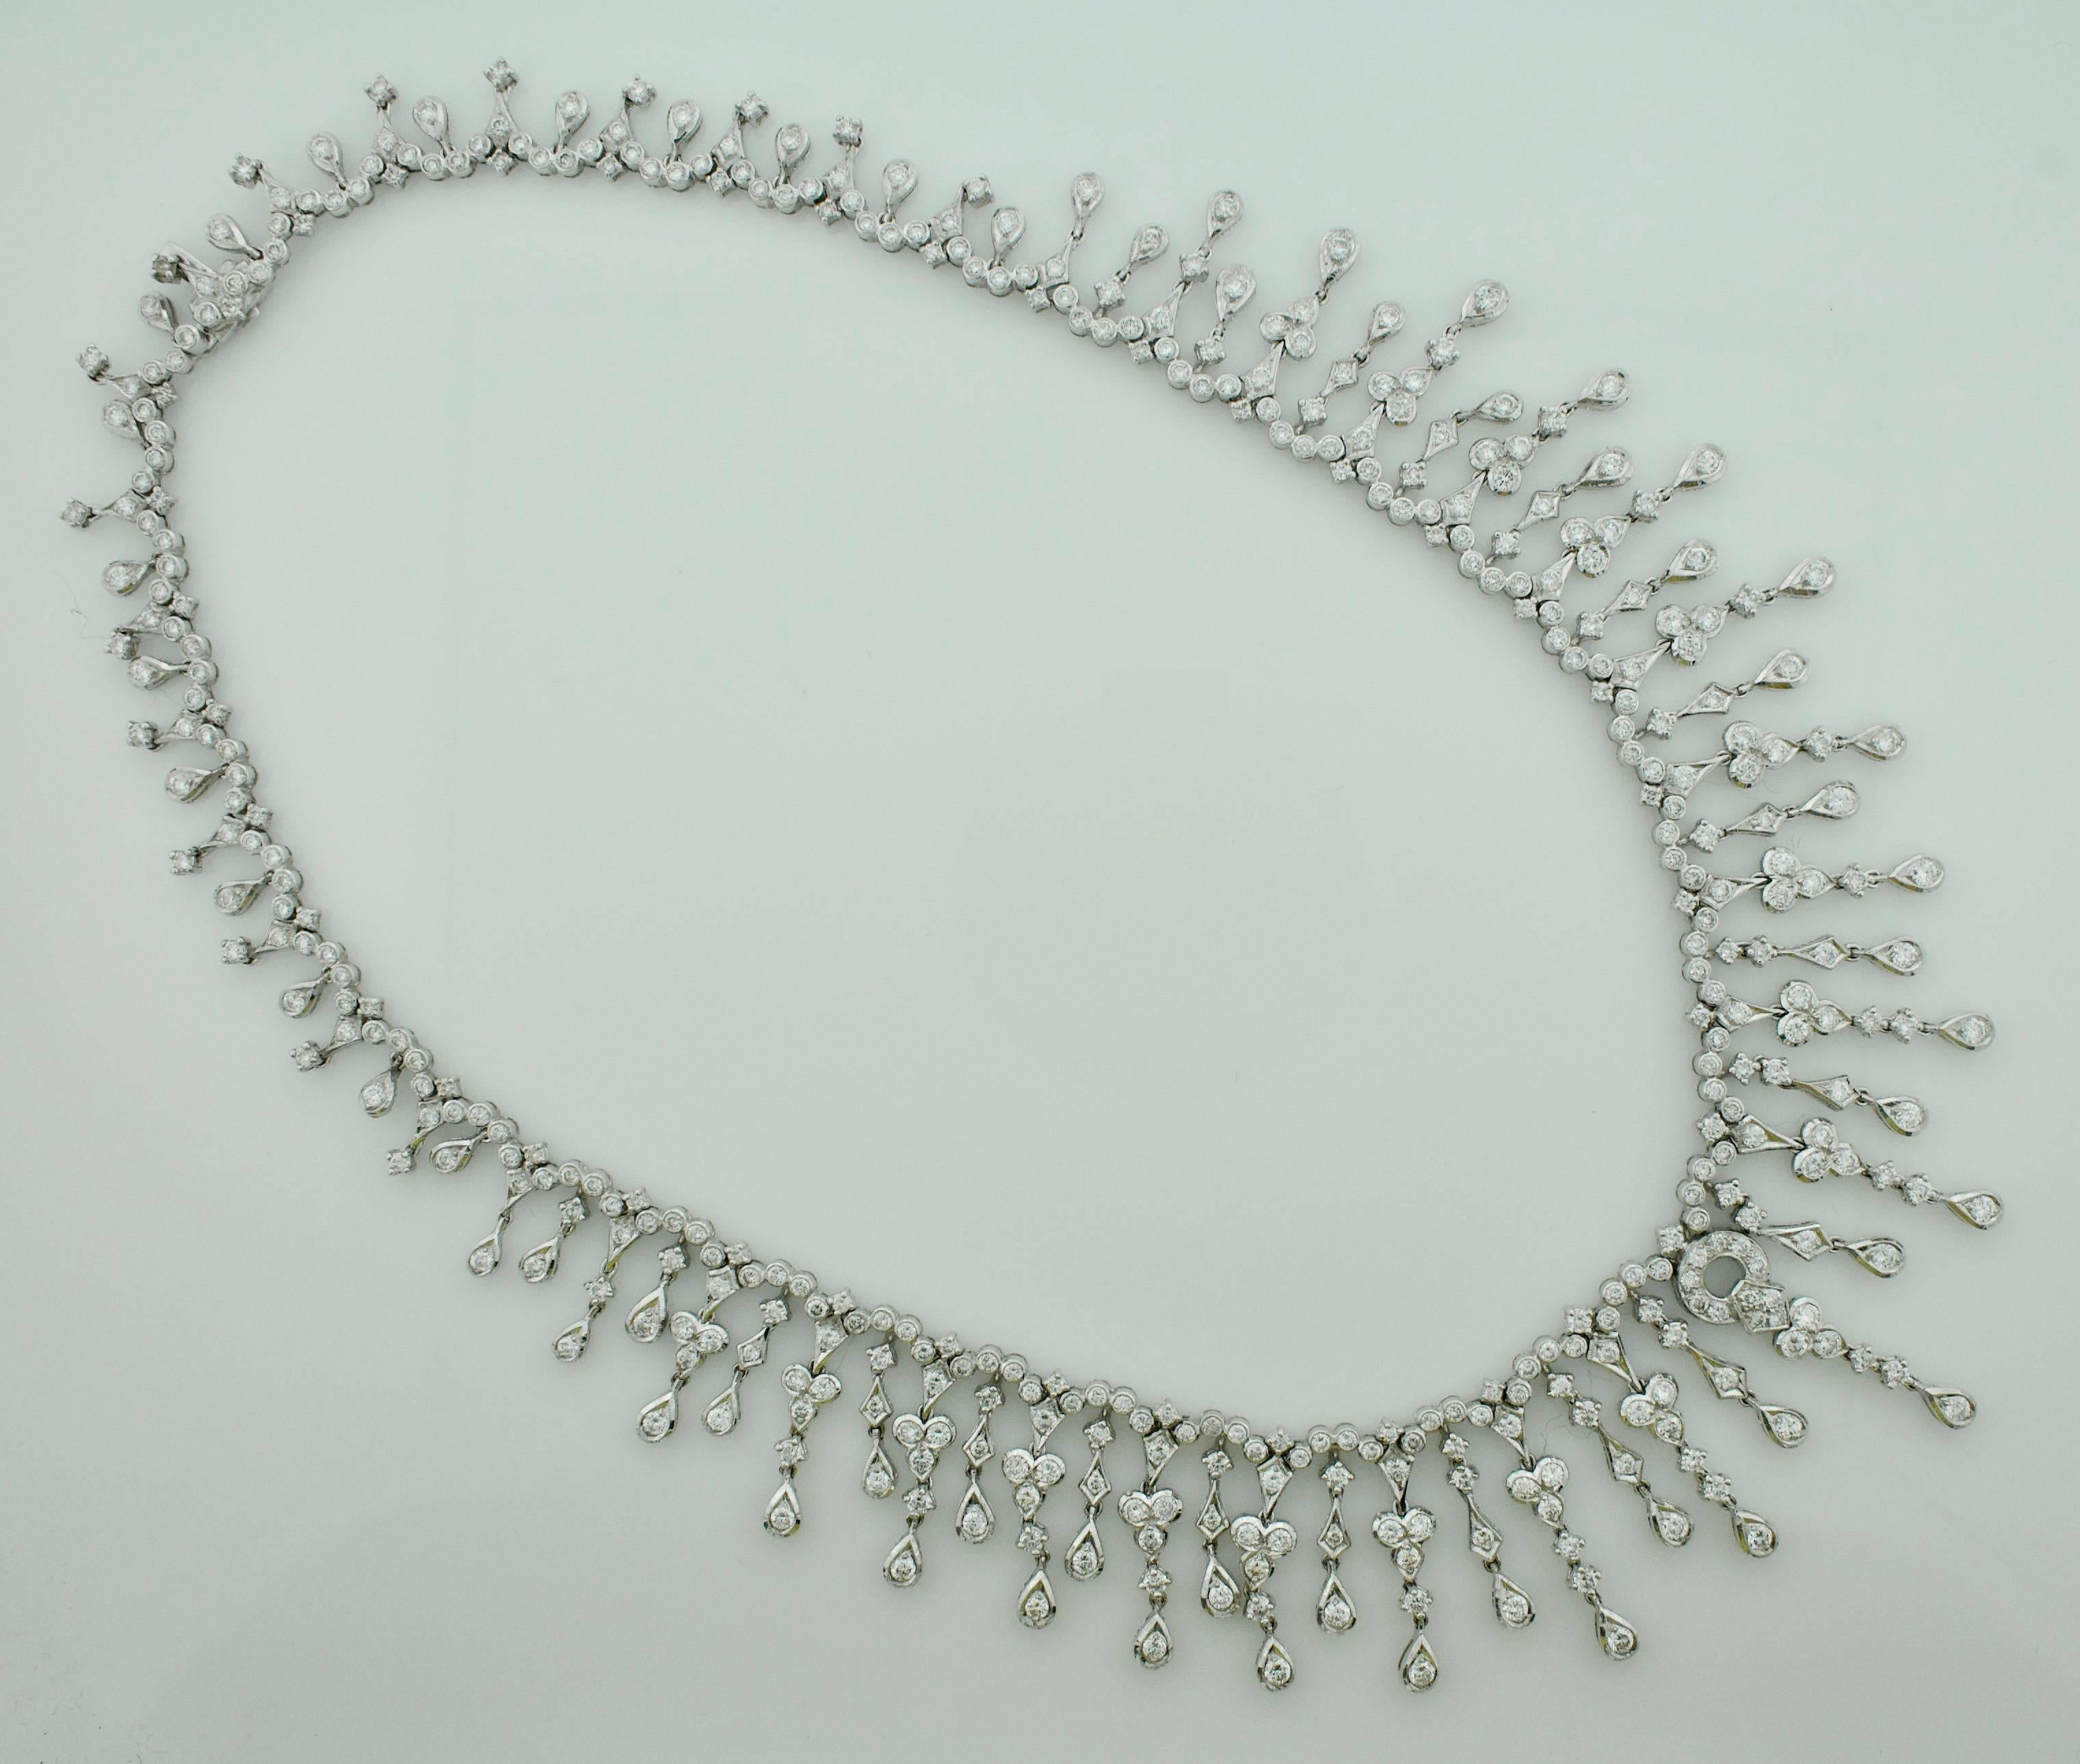 Important Dangling Diamond Necklace in 18k 11.60 carats
Four Hundred and Nineteen Round Brilliant Cut Diamonds weighing 11.60 carats approximately [G - I  VS2-SI]  (no imperfections visible to the naked eye)
Dance The Night Away as This Fully